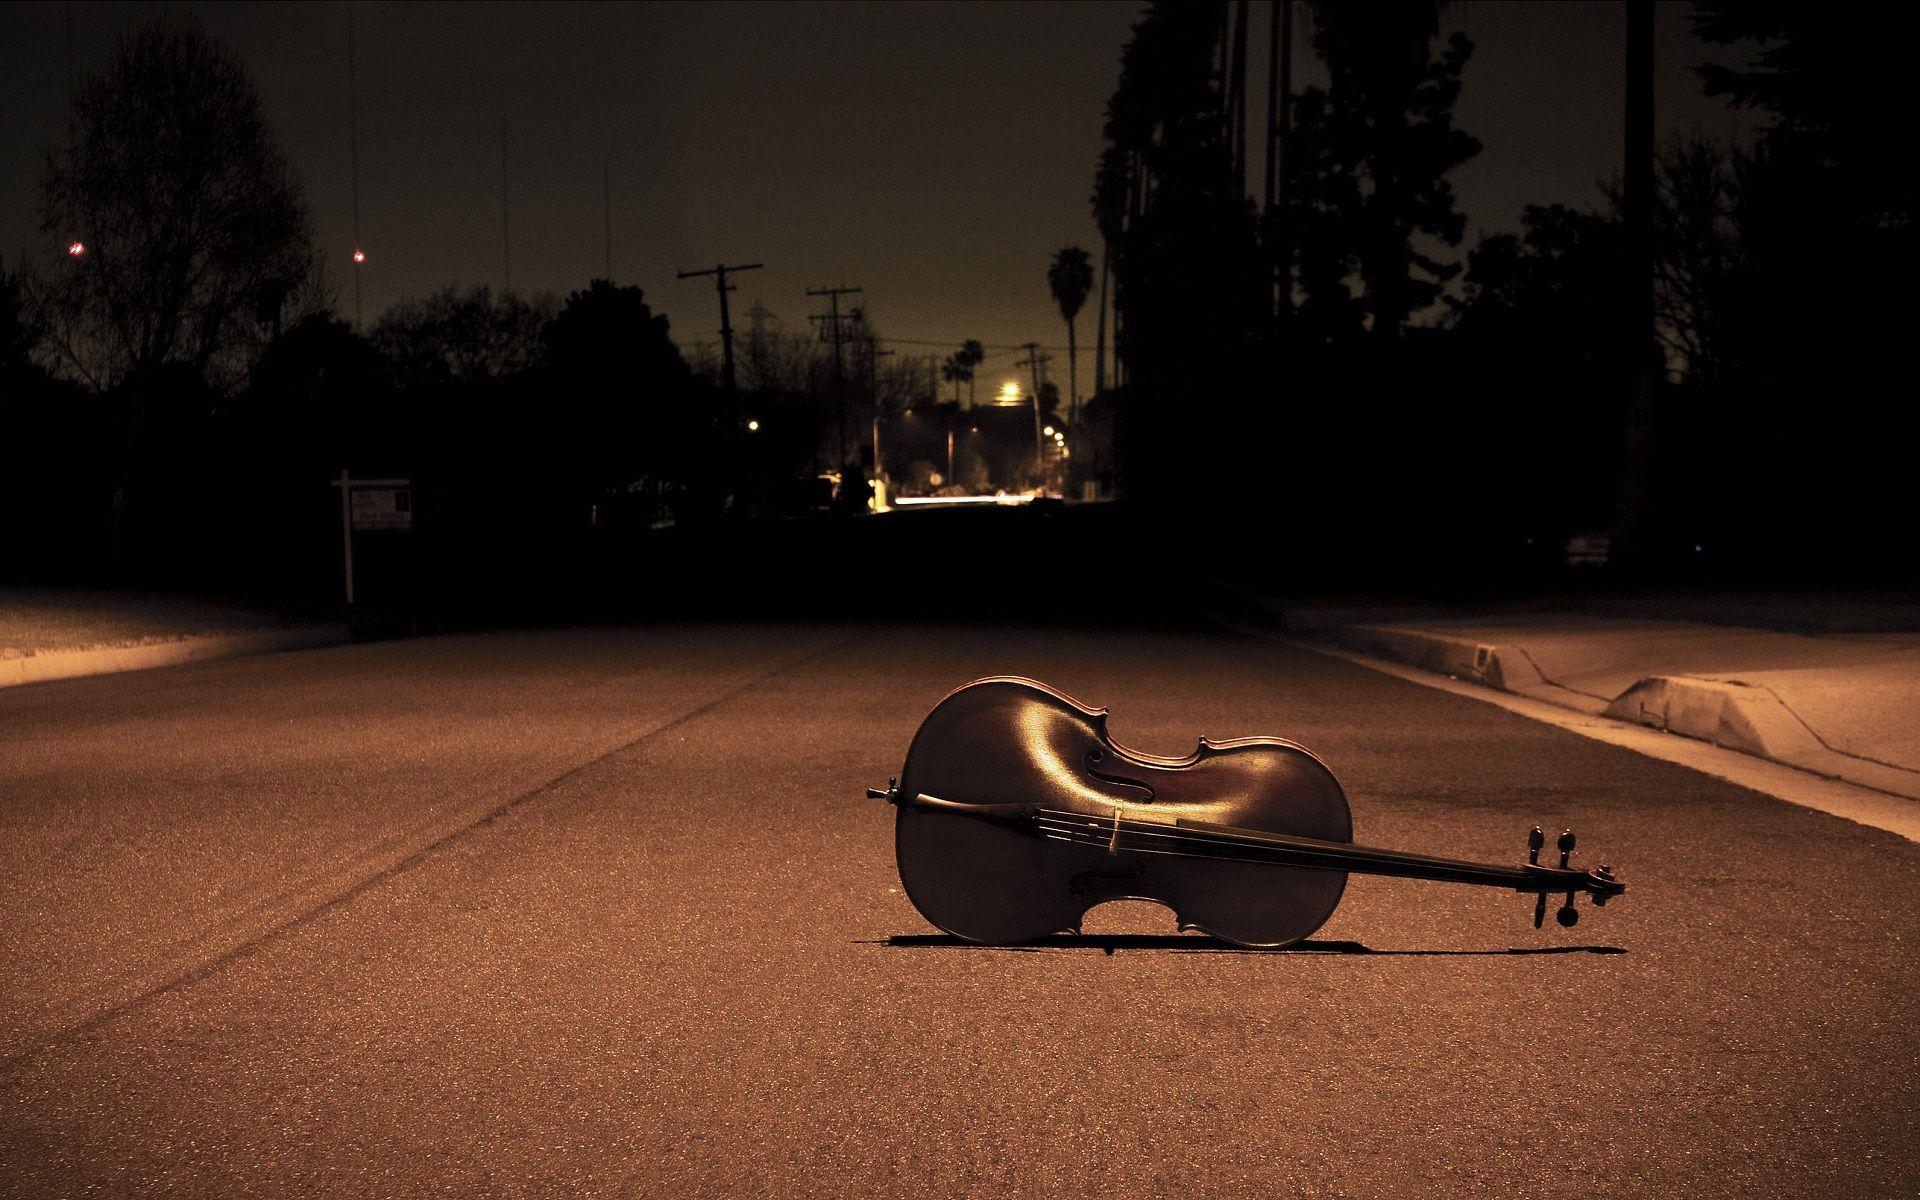 Alone guitar on lonely city road sad music wallpaper. HD